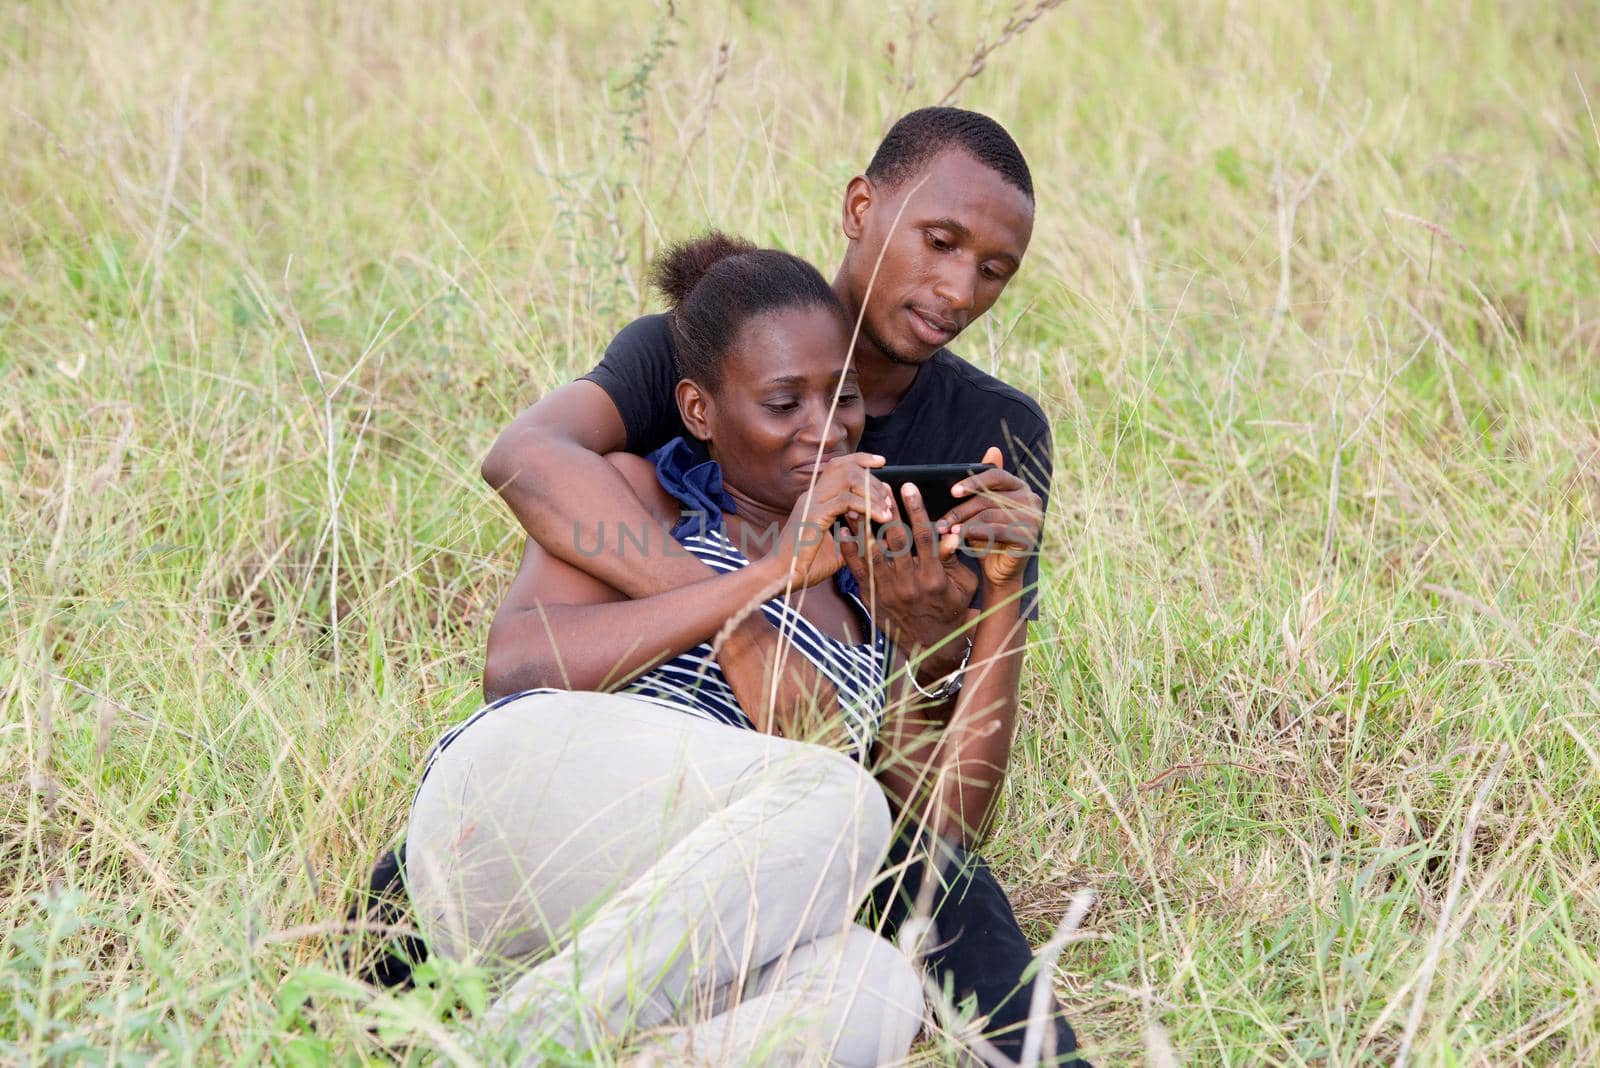 young girl and young man sitting in grass watching mobile phone.